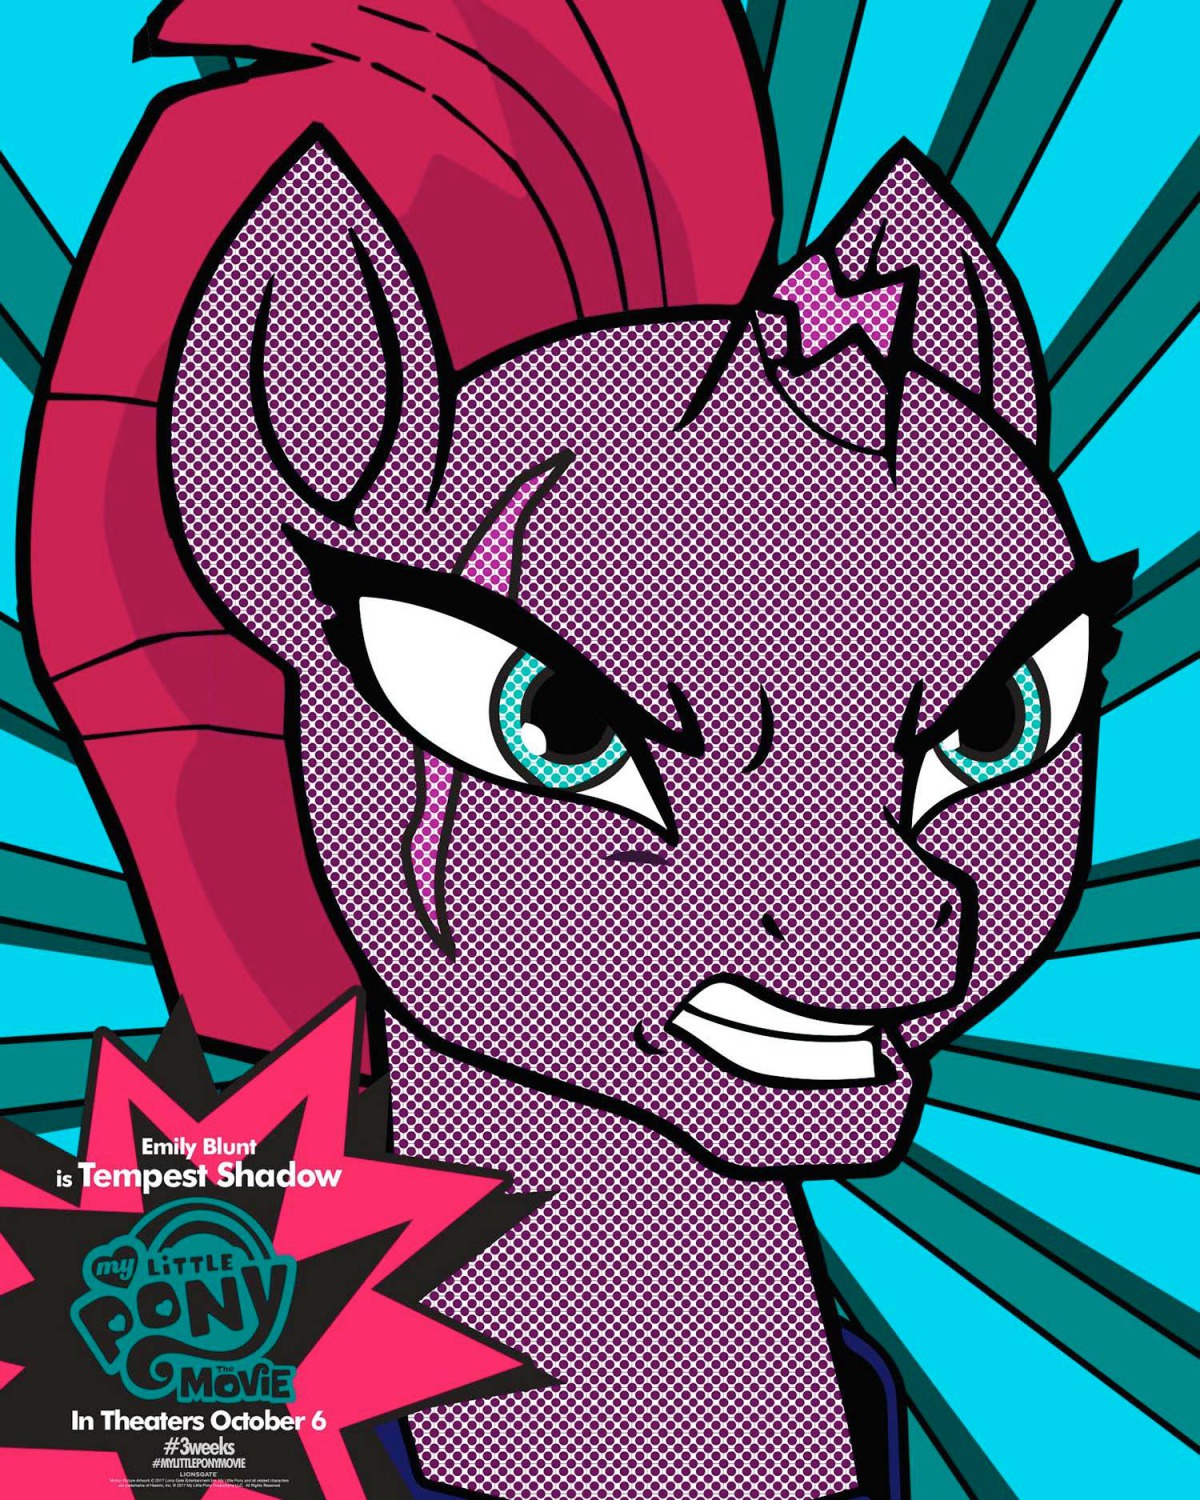 Extra Large Movie Poster Image for My Little Pony: The Movie (#38 of 55)